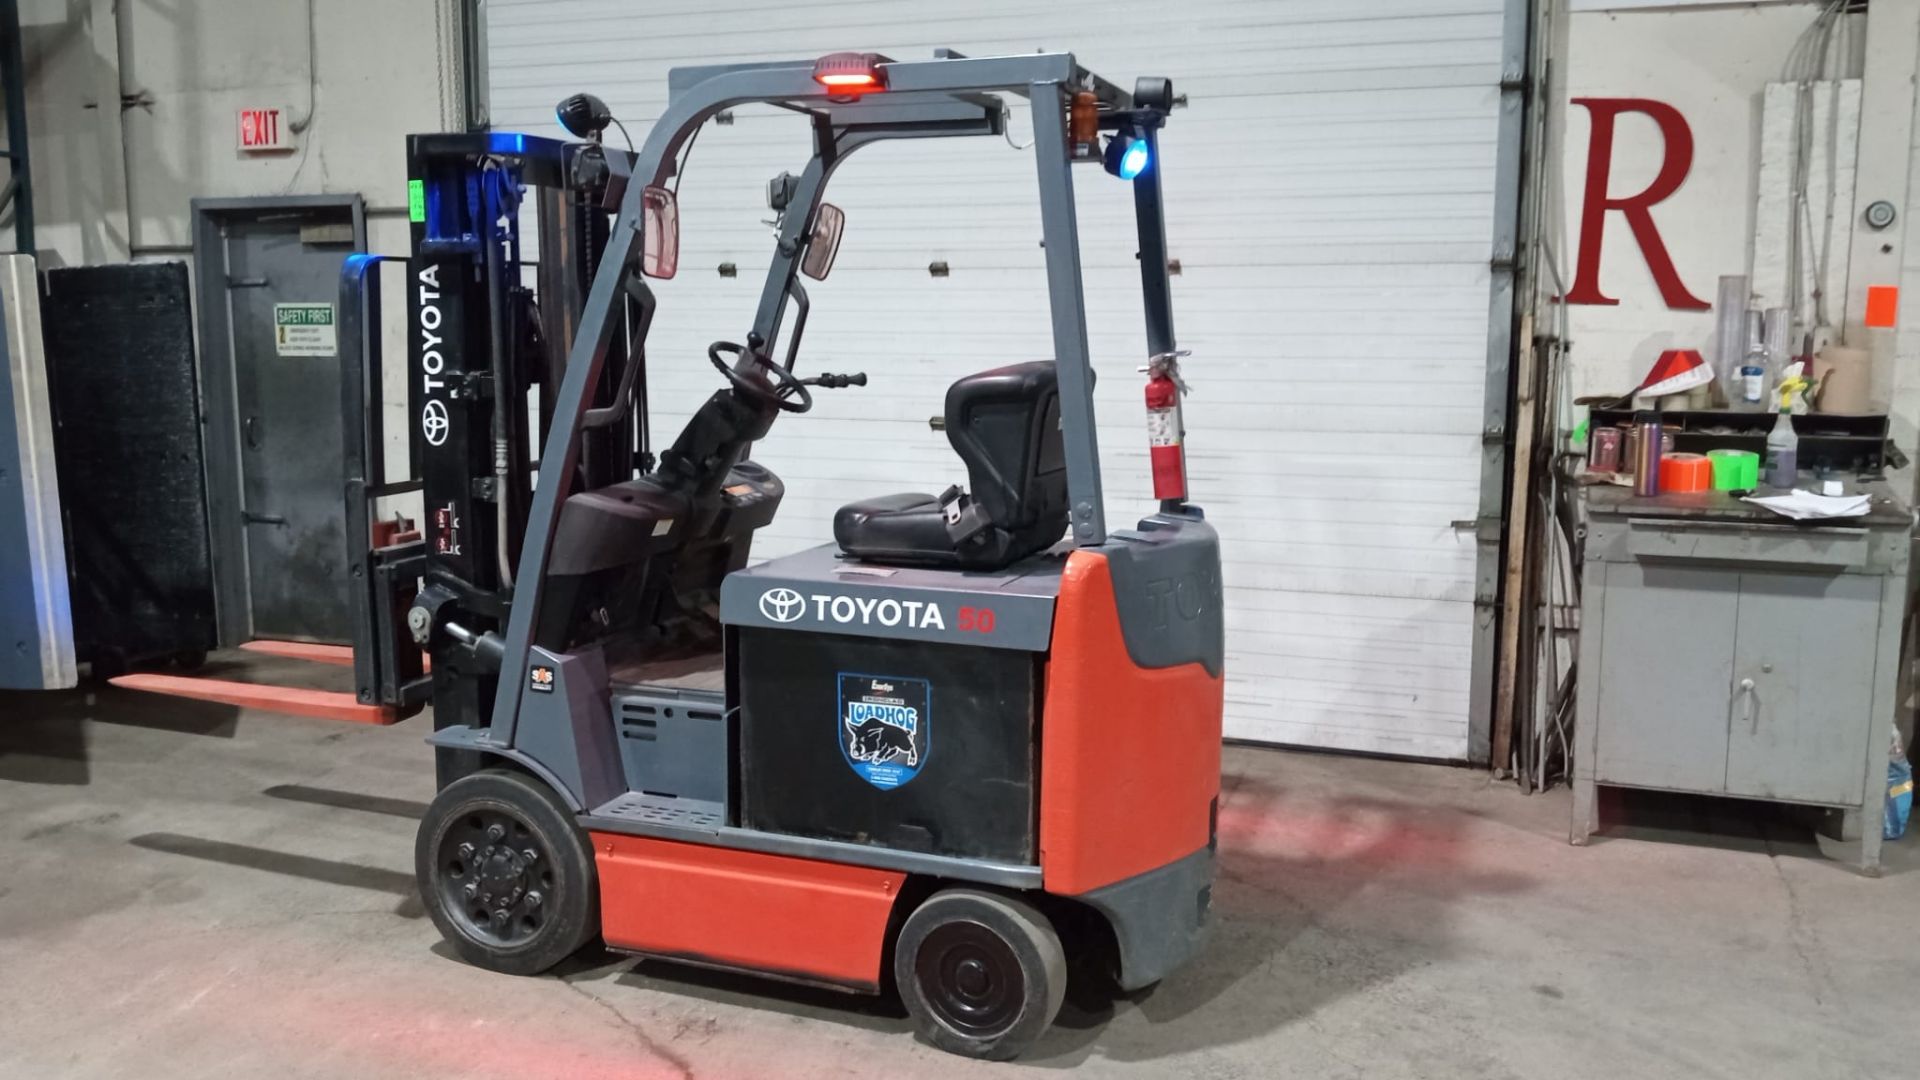 2014 TOYOTA 5,000lbs Capacity Electric Forklift 36V with sideshift & 3-Stage Mast - FREE CUSTOMS - Image 2 of 6